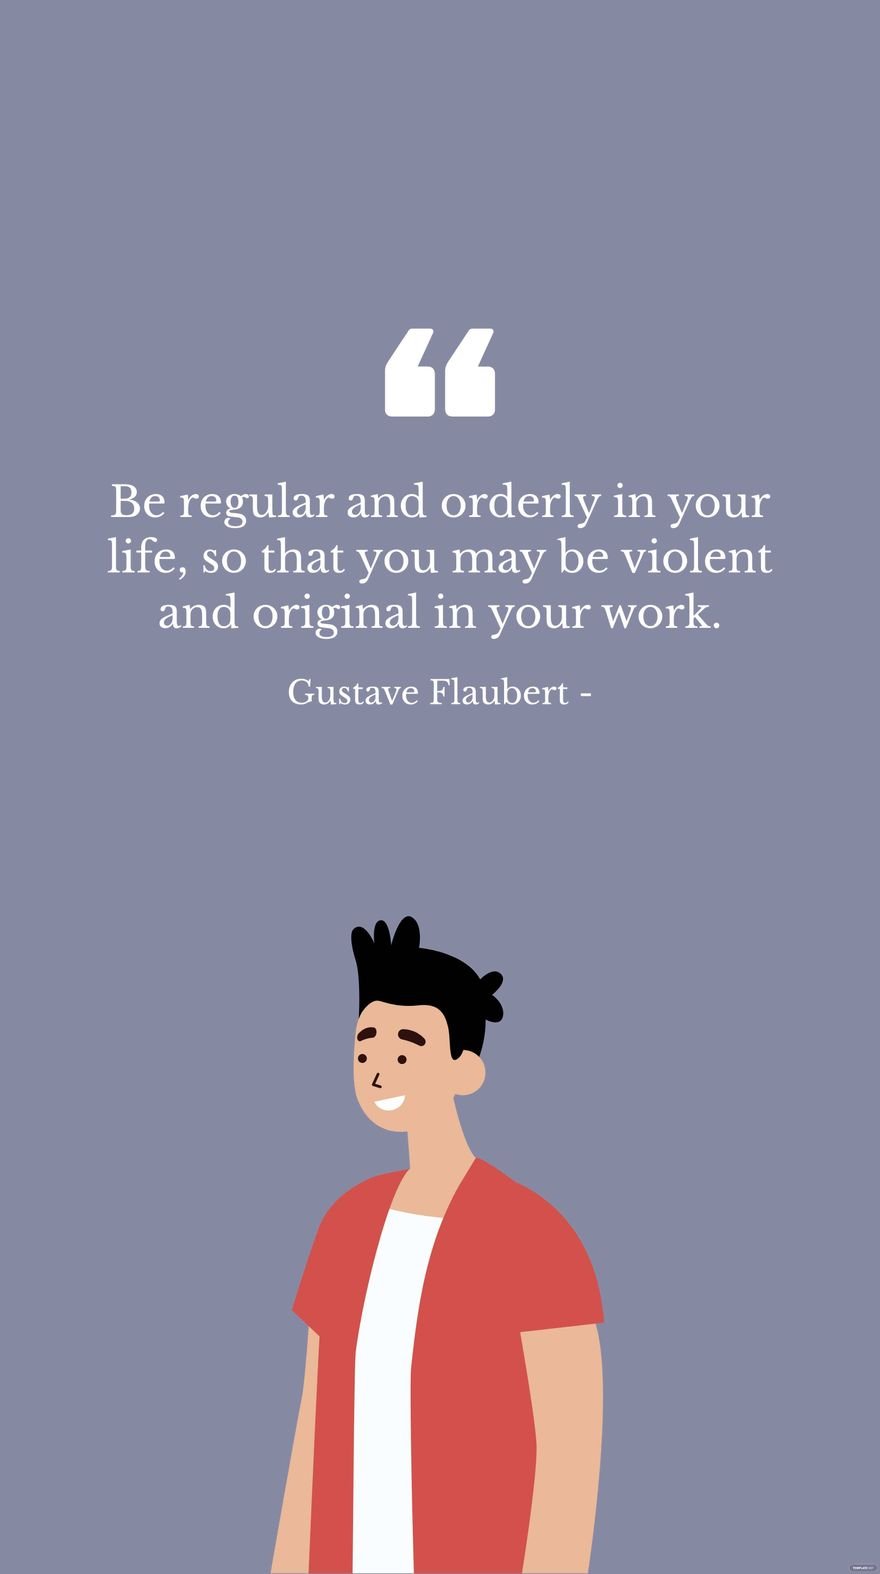 Gustave Flaubert - Be regular and orderly in your life, so that you may be violent and original in your work. in JPG